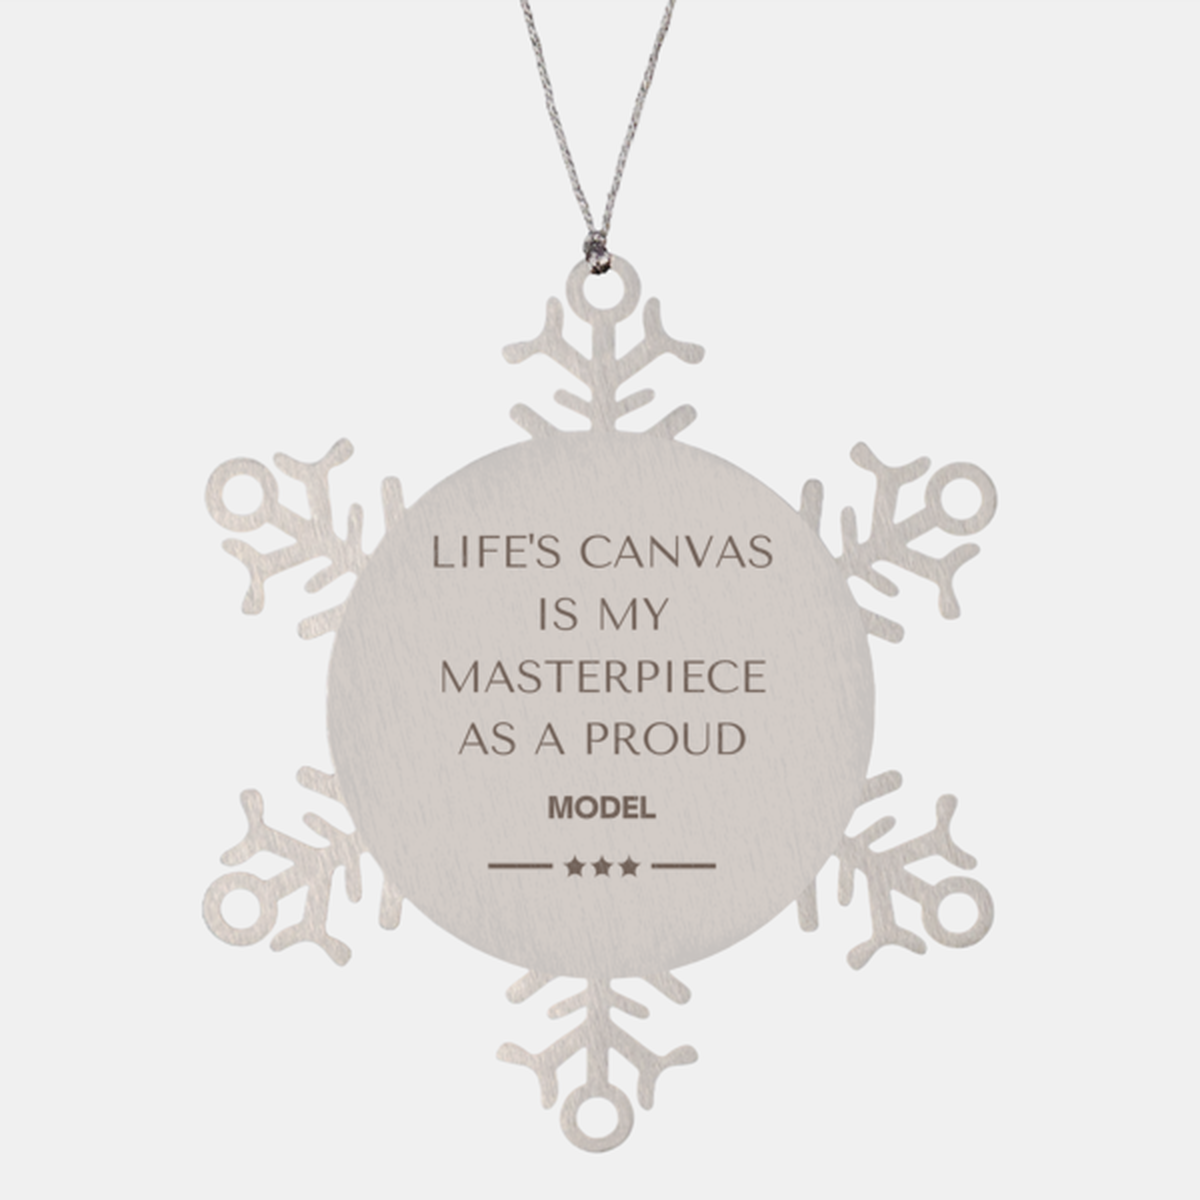 Proud Model Gifts, Life's canvas is my masterpiece, Epic Birthday Christmas Unique Snowflake Ornament For Model, Coworkers, Men, Women, Friends